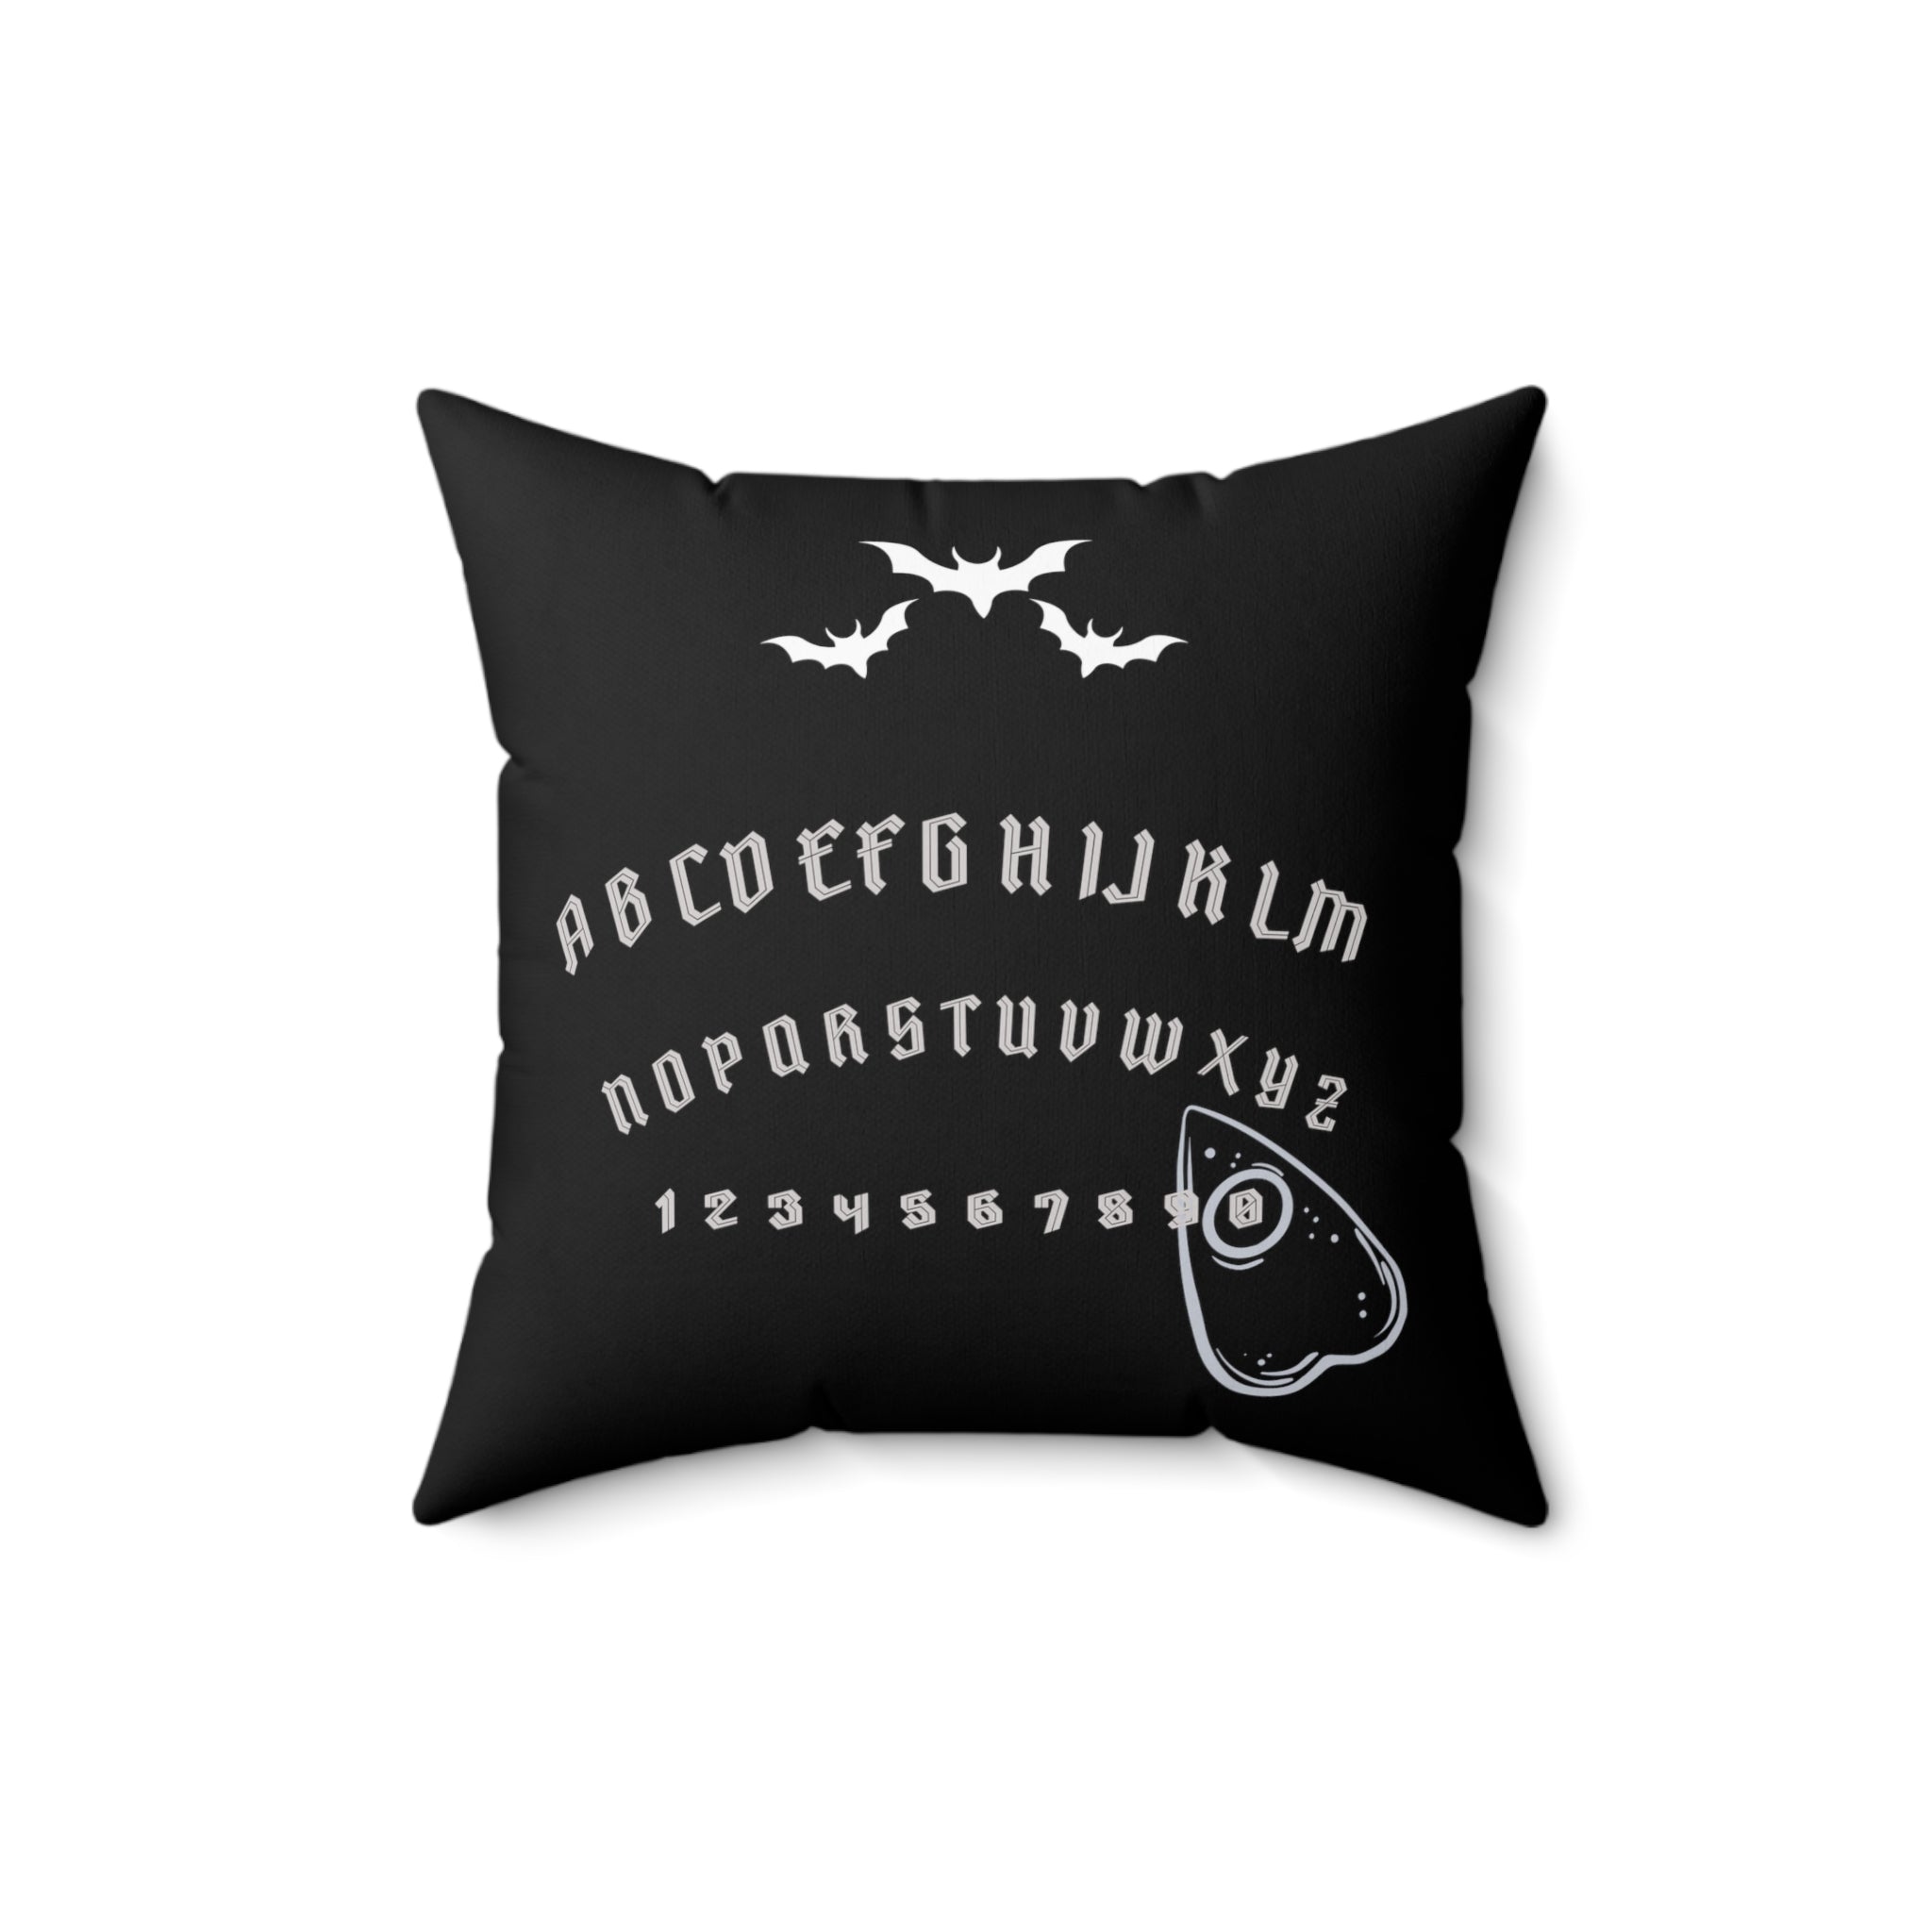 Black Ouija Board Faux Suede Pillow or Pillow Cover